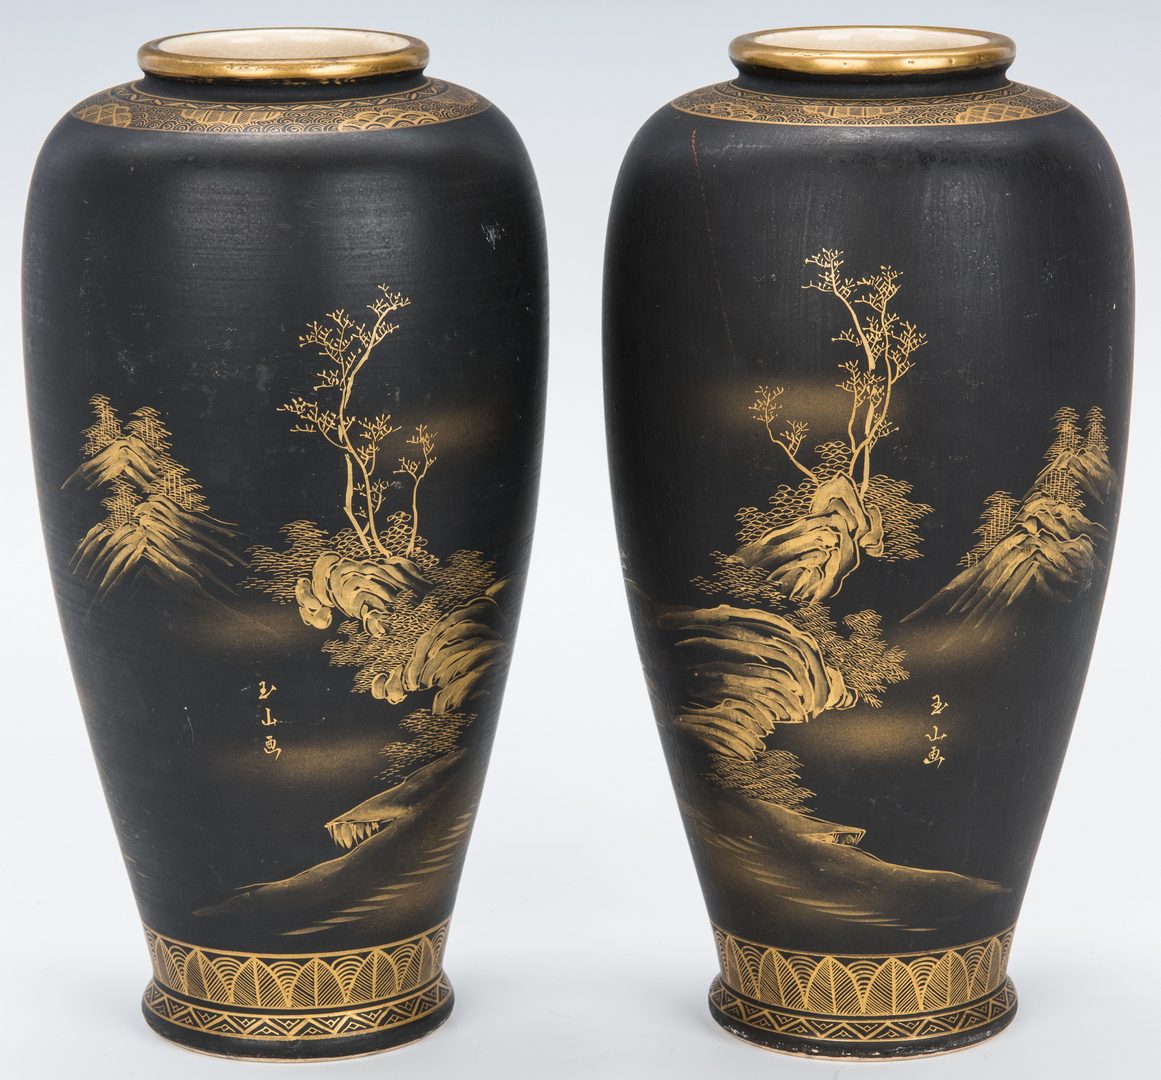 Lot 16: Pair of Black Satsuma Vases and Plate